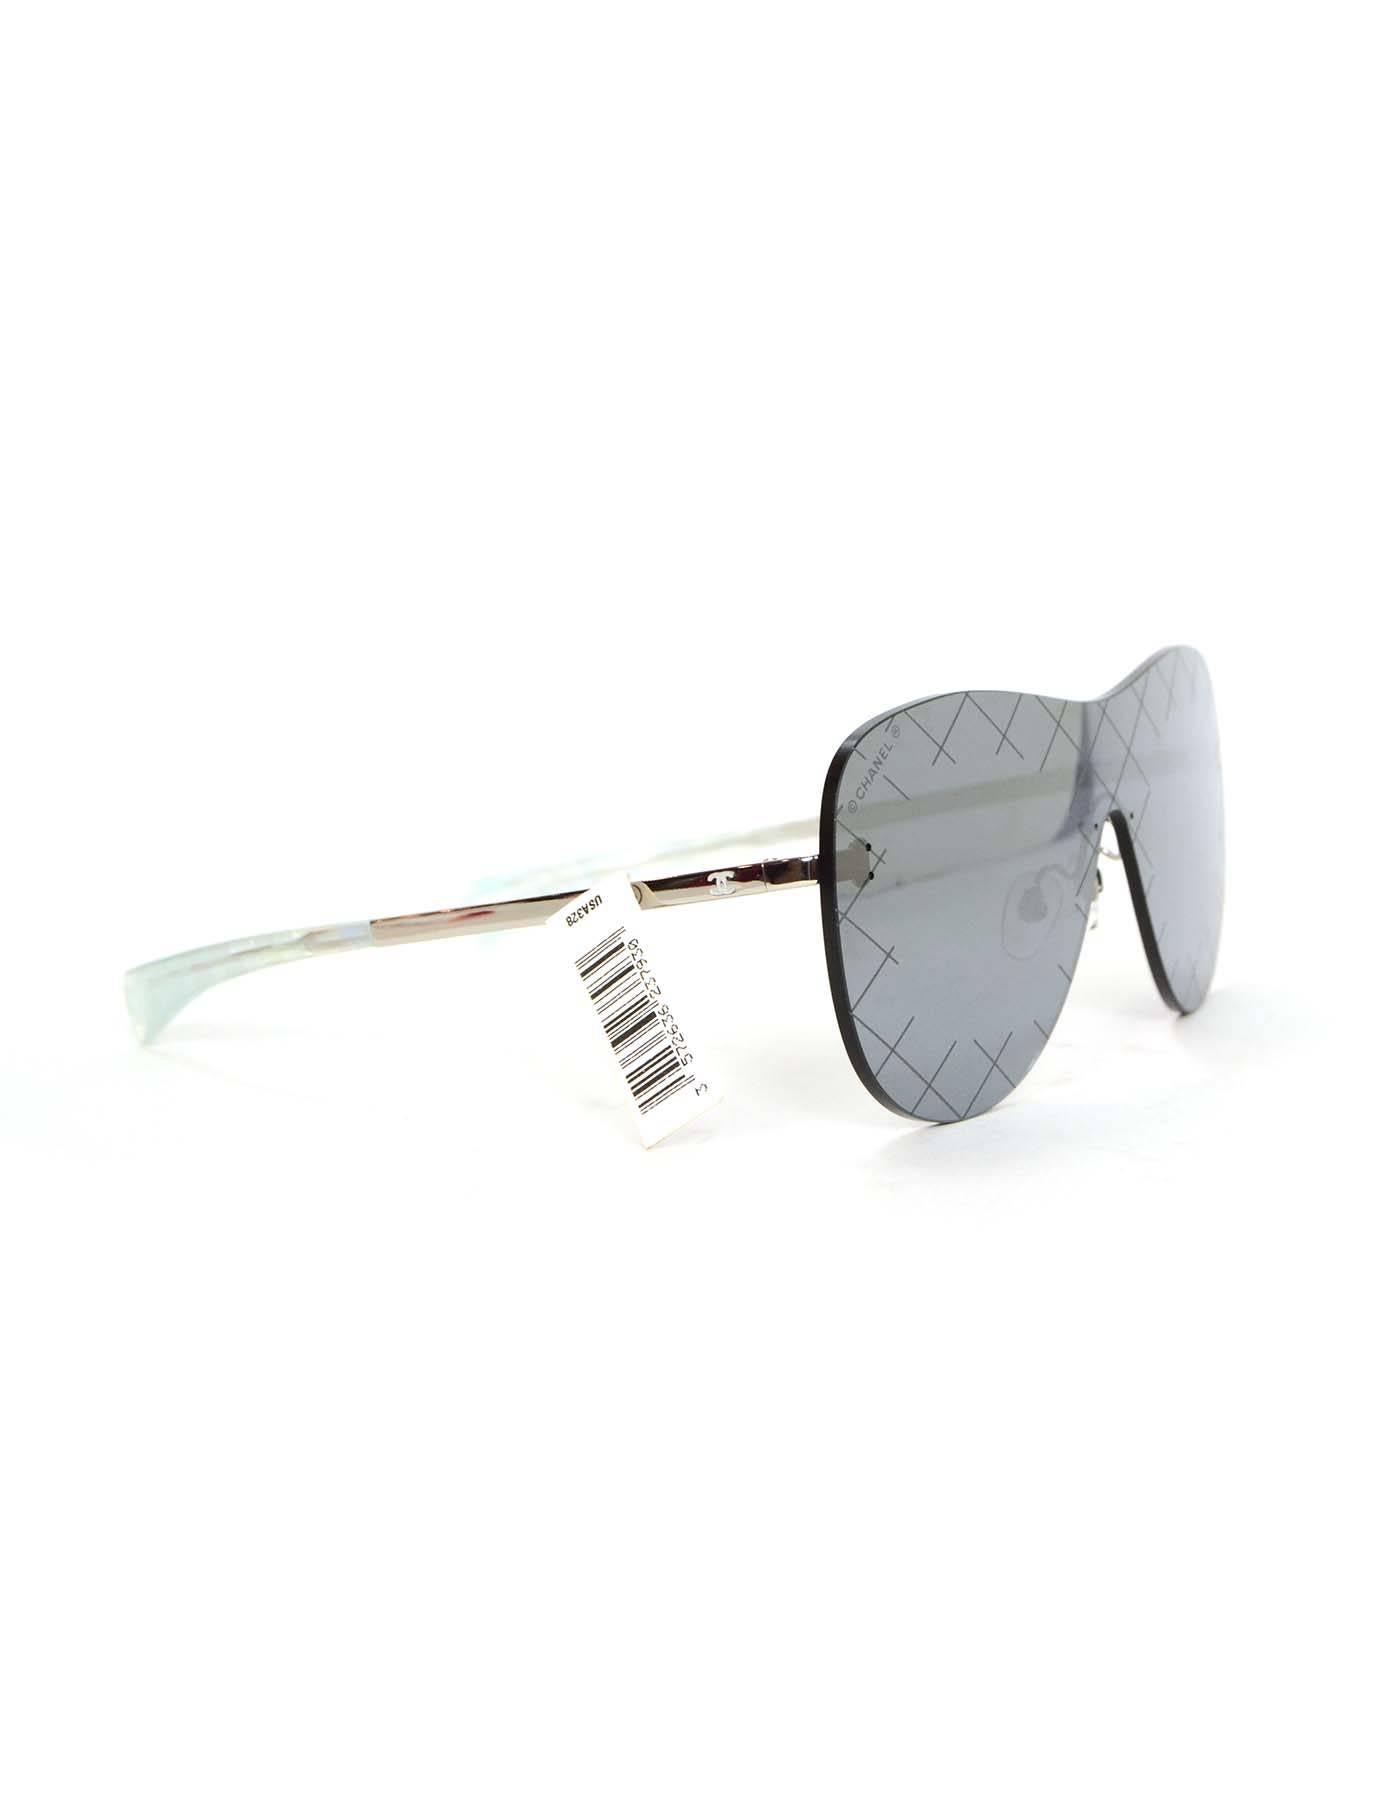 Chanel NEW '16 Silver & Grey Shield Mirror Aviator Sunglasses 
Features light quilting around edges of lenses
Made In: Italy
Year of Production: 2016
Color: Grey silver
Materials: Metal and glass
Identification Number: BC18801728
Stamp: Left